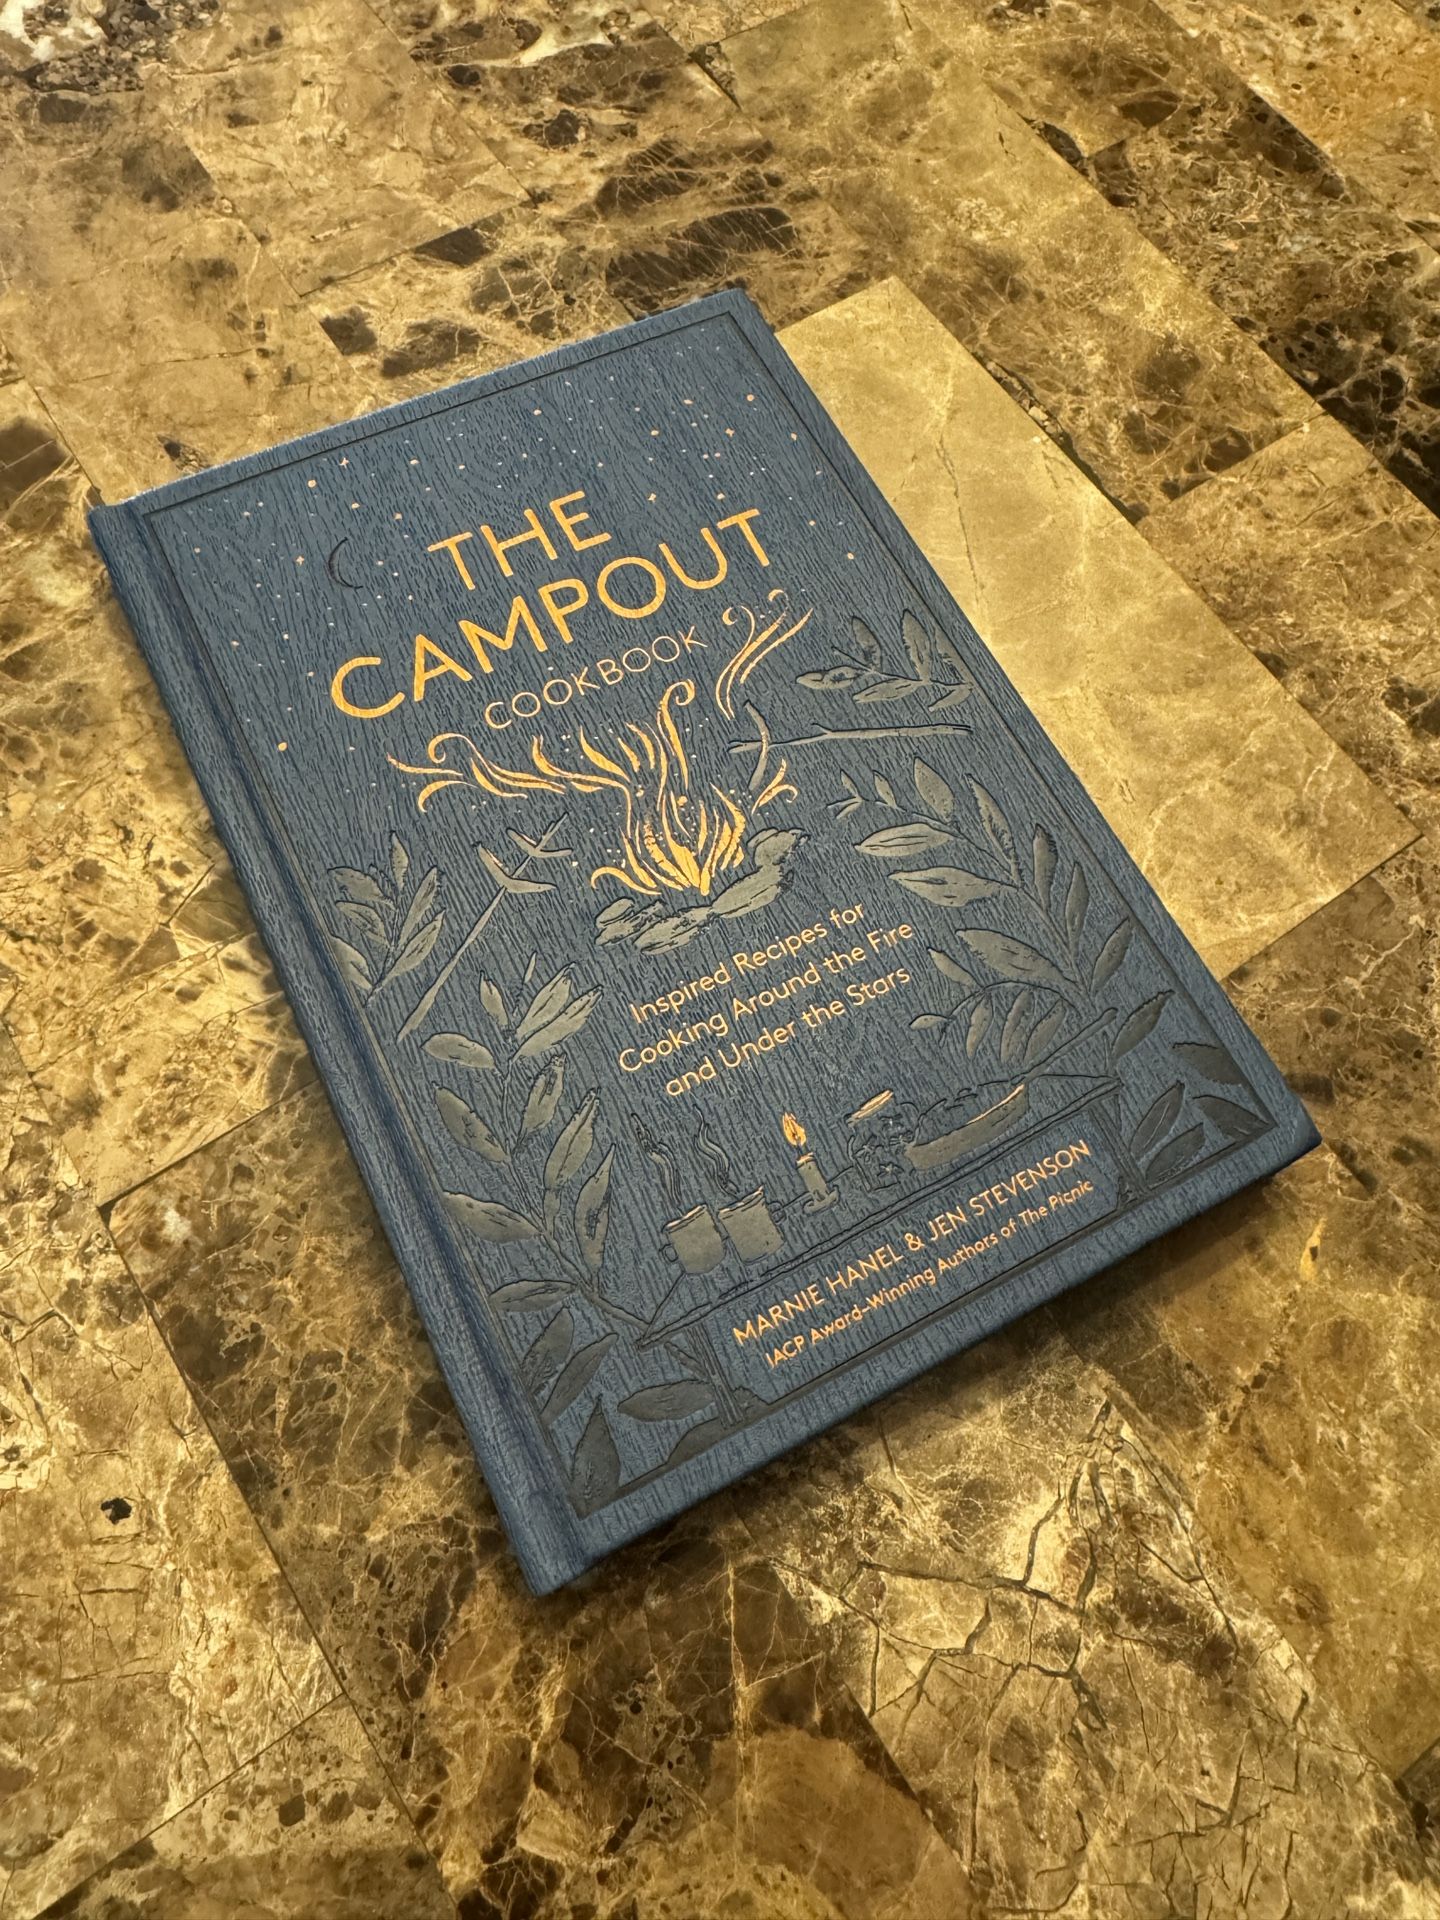 Cookbook: The Campout